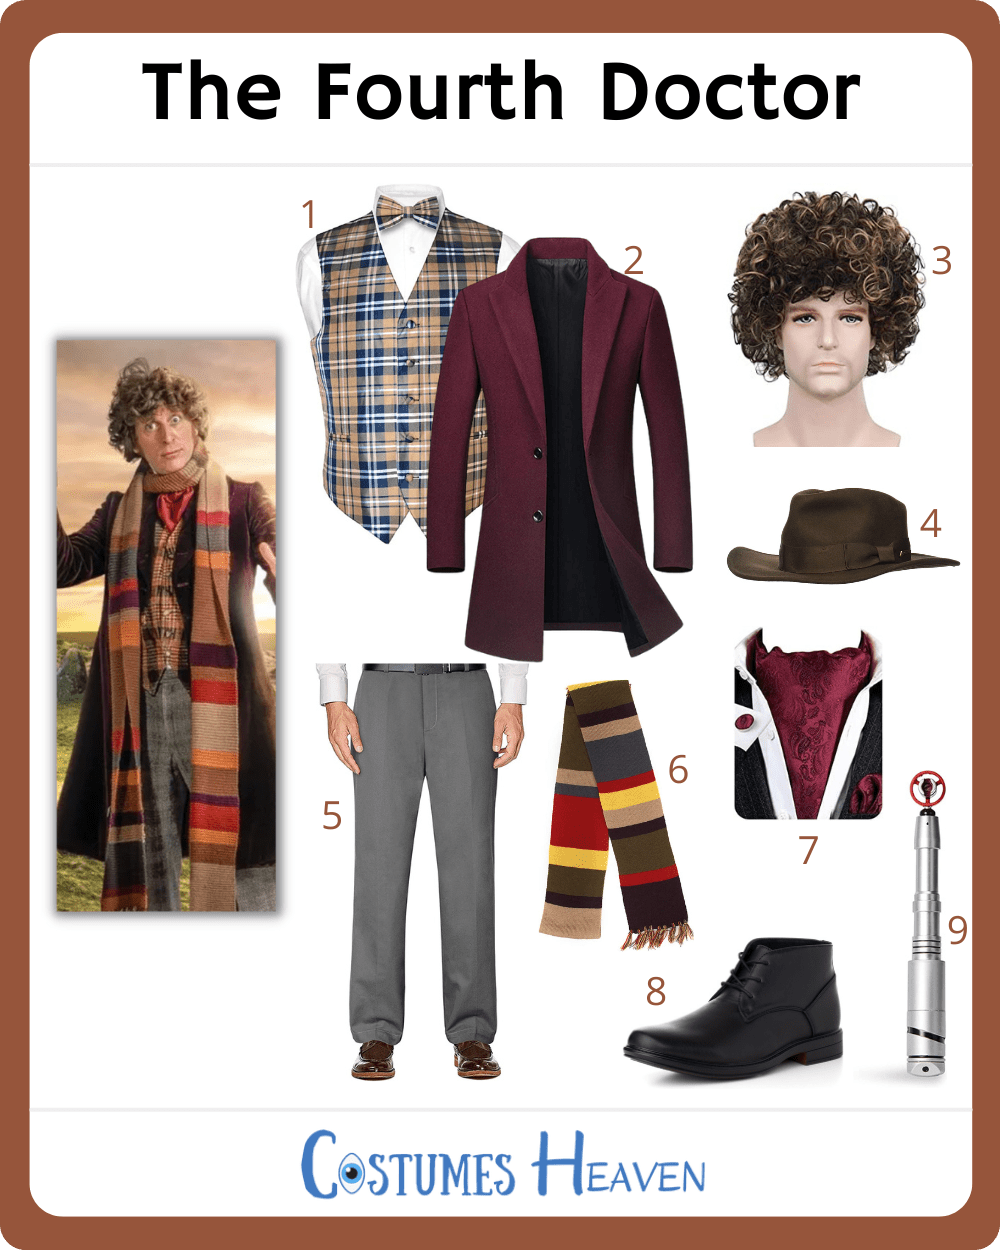 The Fourth Doctor Costume